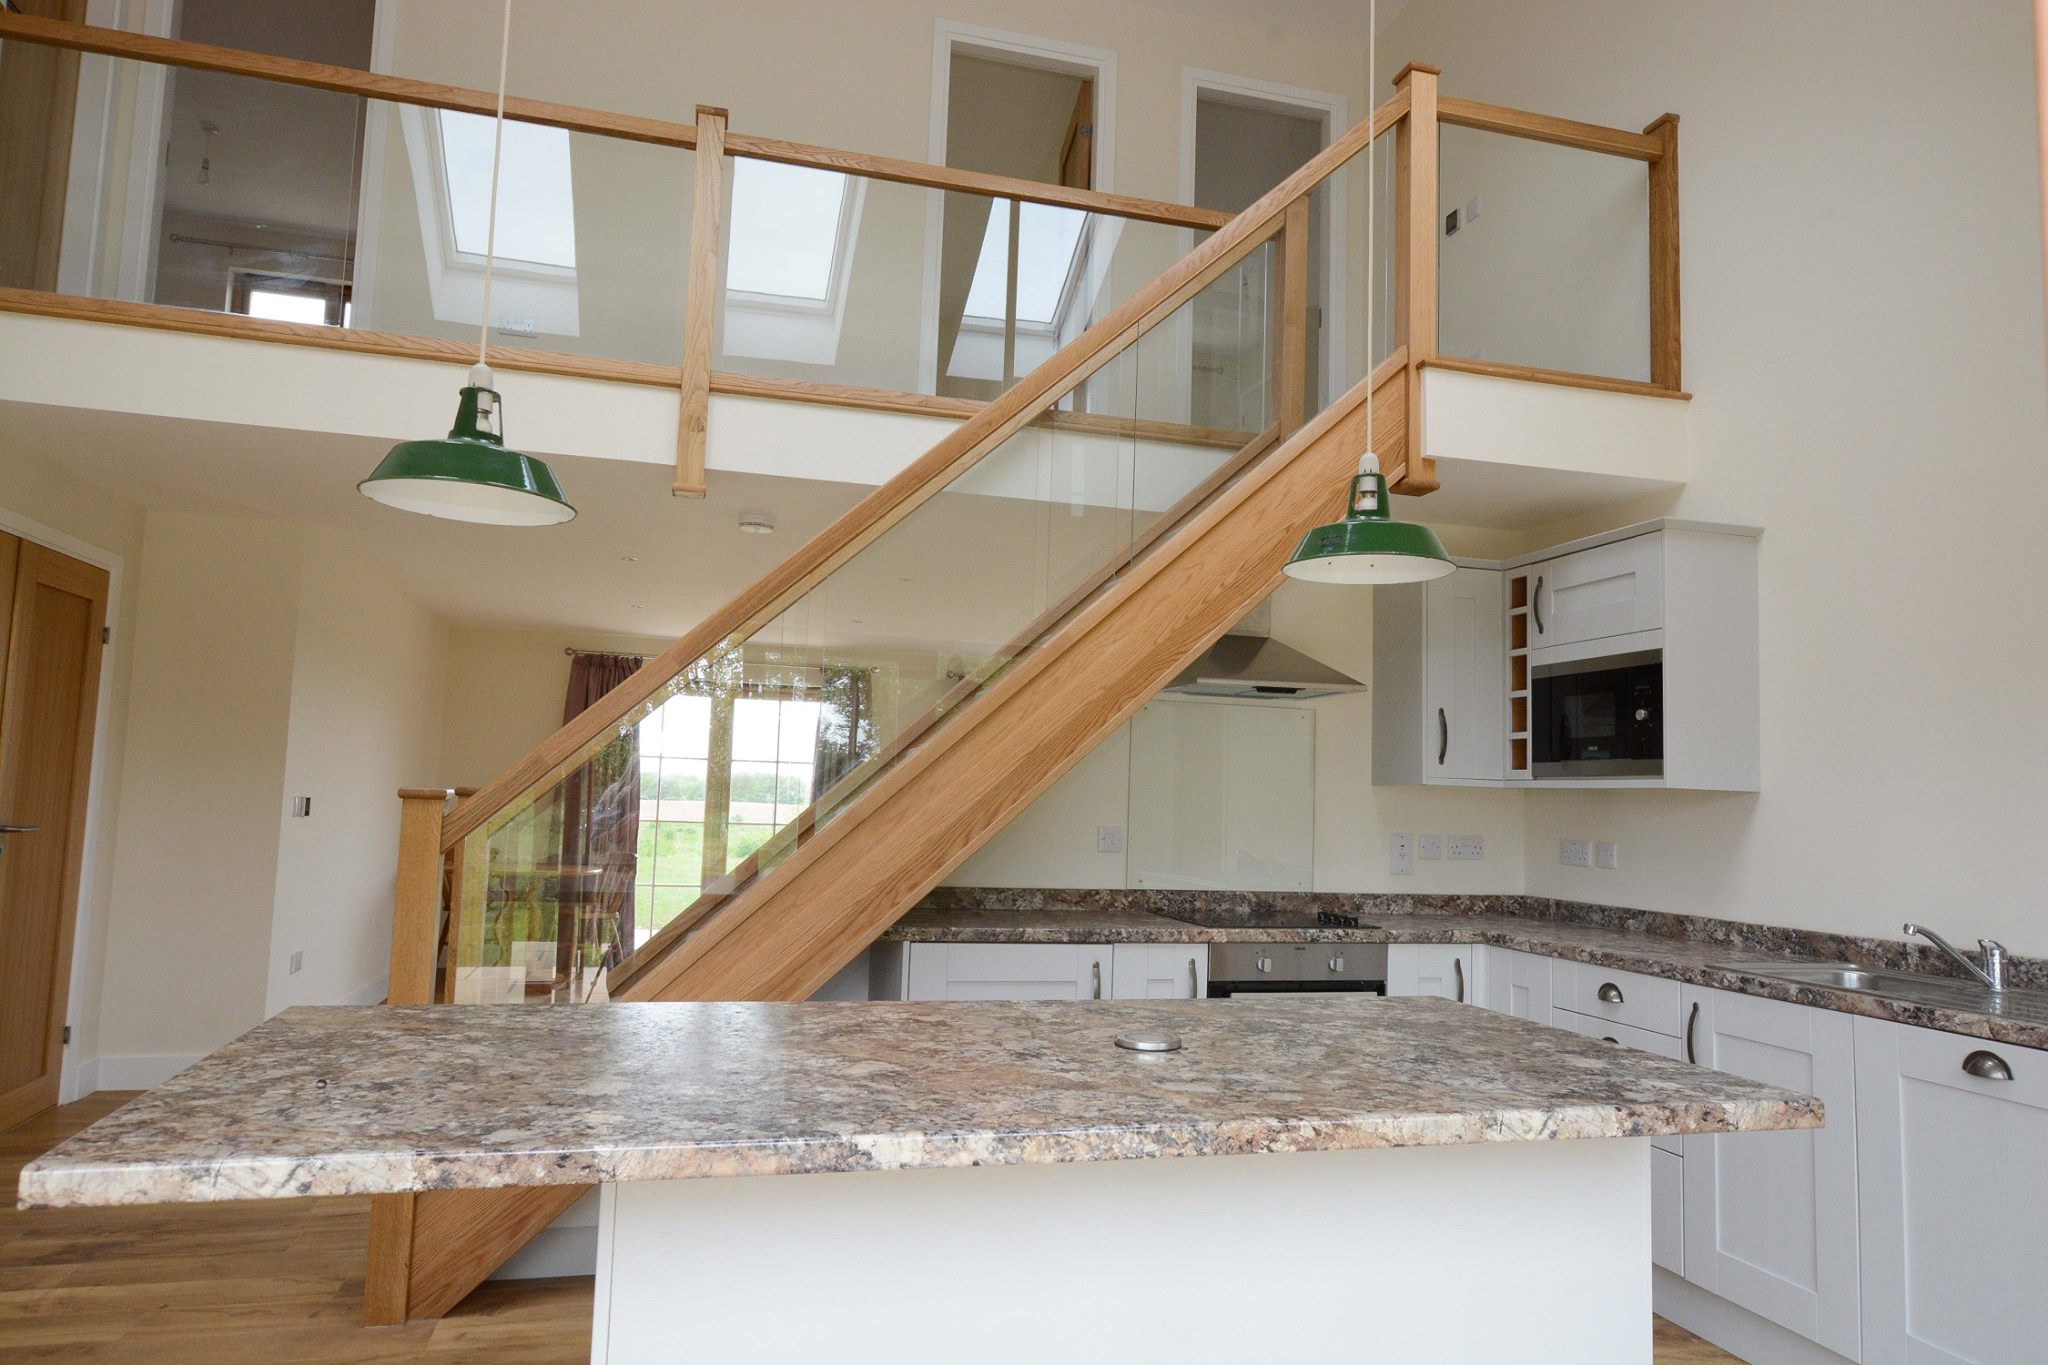 construction company in Norfolk: stylish modern interior on this new build project